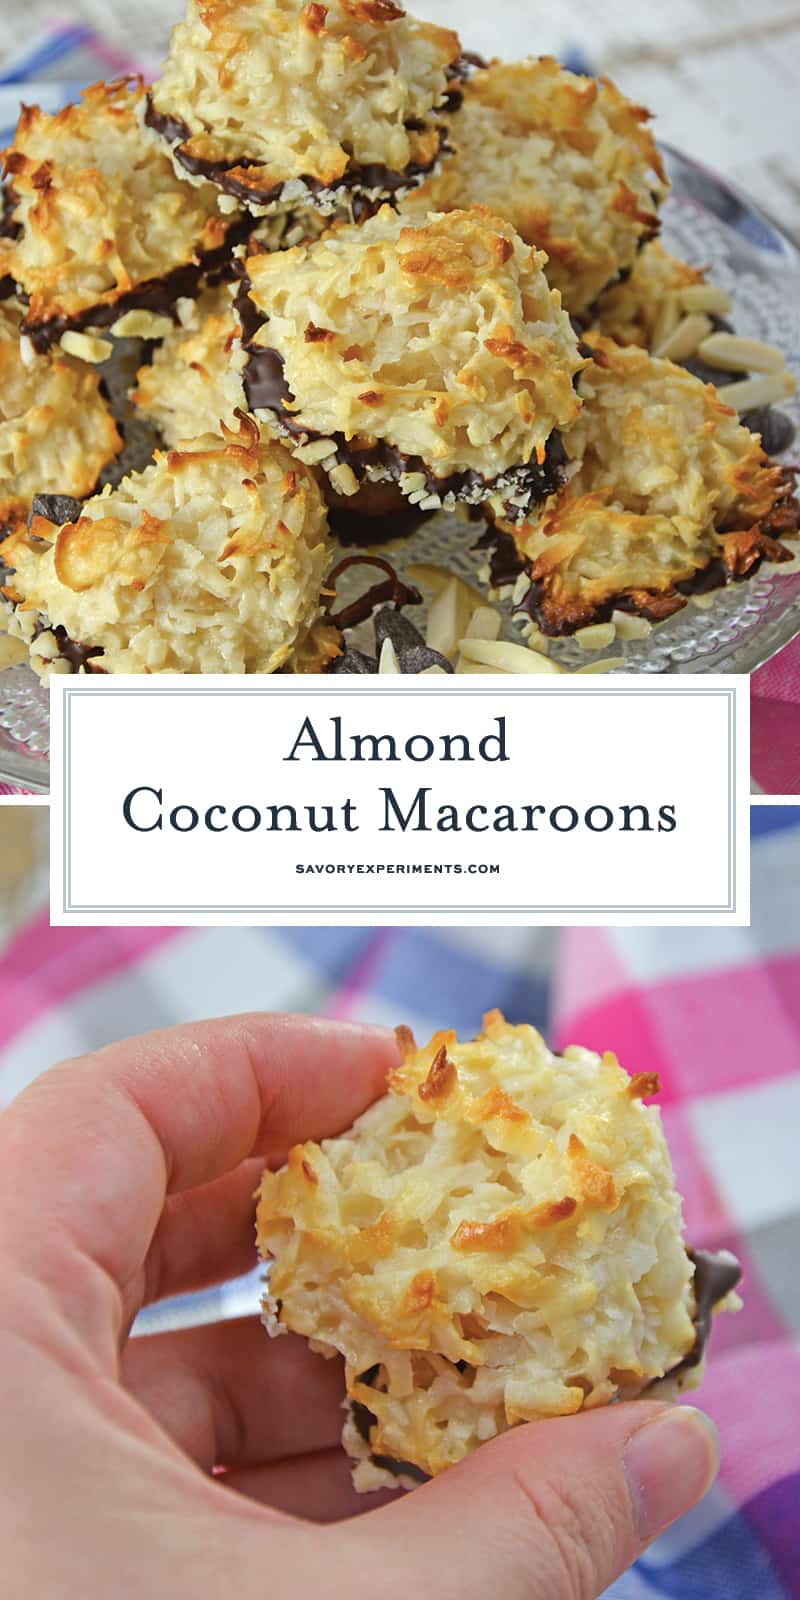 Almond Coconut Macaroons are light, fluffy coconut biscuits dipped in chocolate and almonds. Perfect as a dessert, for tea for as a an afternoon snack. #coconutmacaroons #macaroonsrecipe www.savoryexperiments.com 